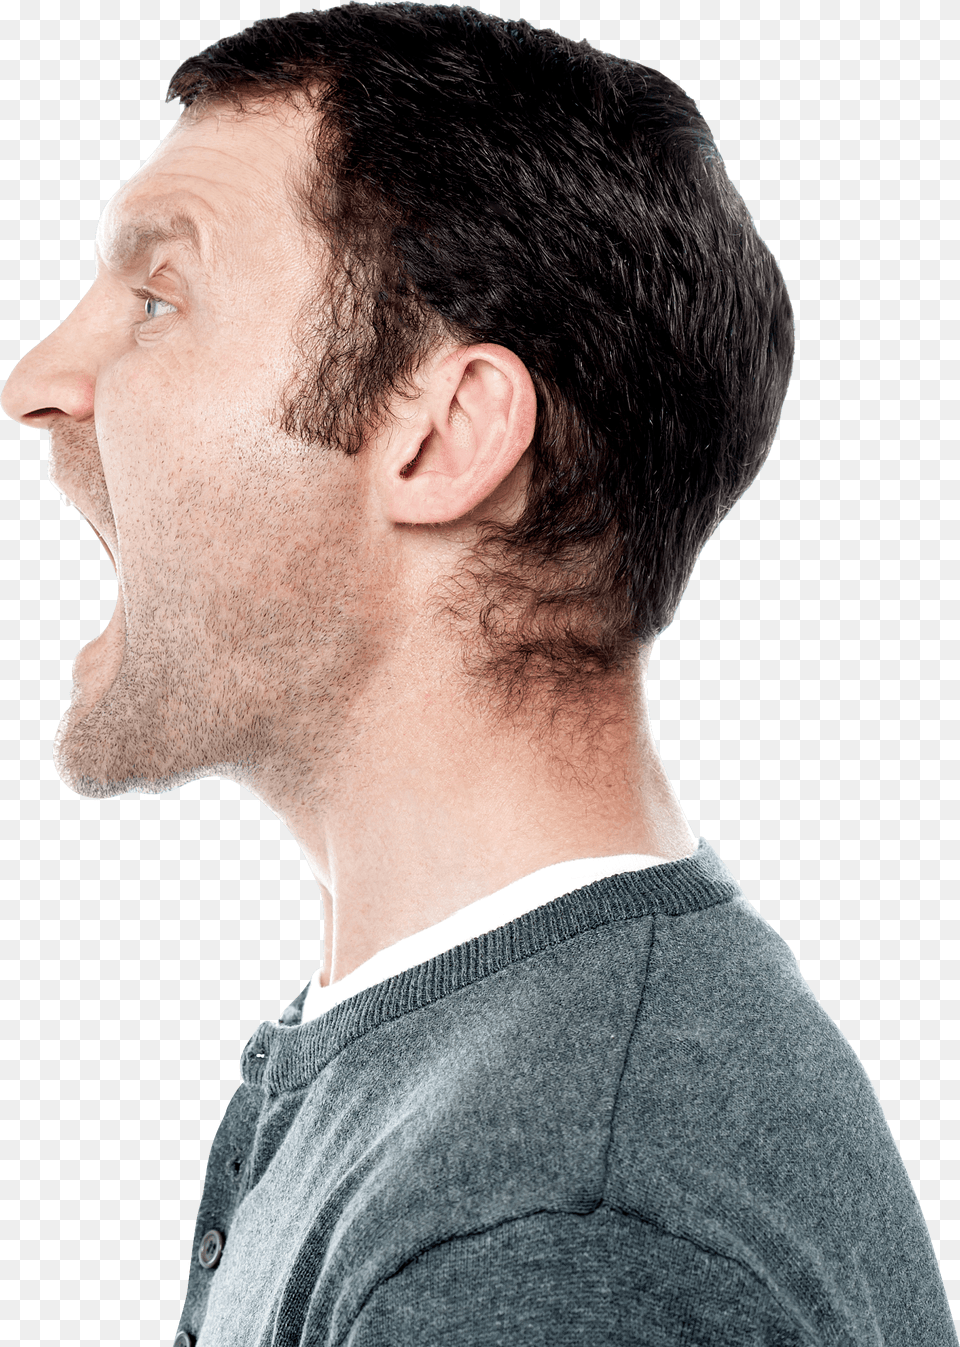 Kisspng Stock Photography Screaming Royalty Screaming Screaming Person Side View, Adult, Neck, Man, Male Free Transparent Png